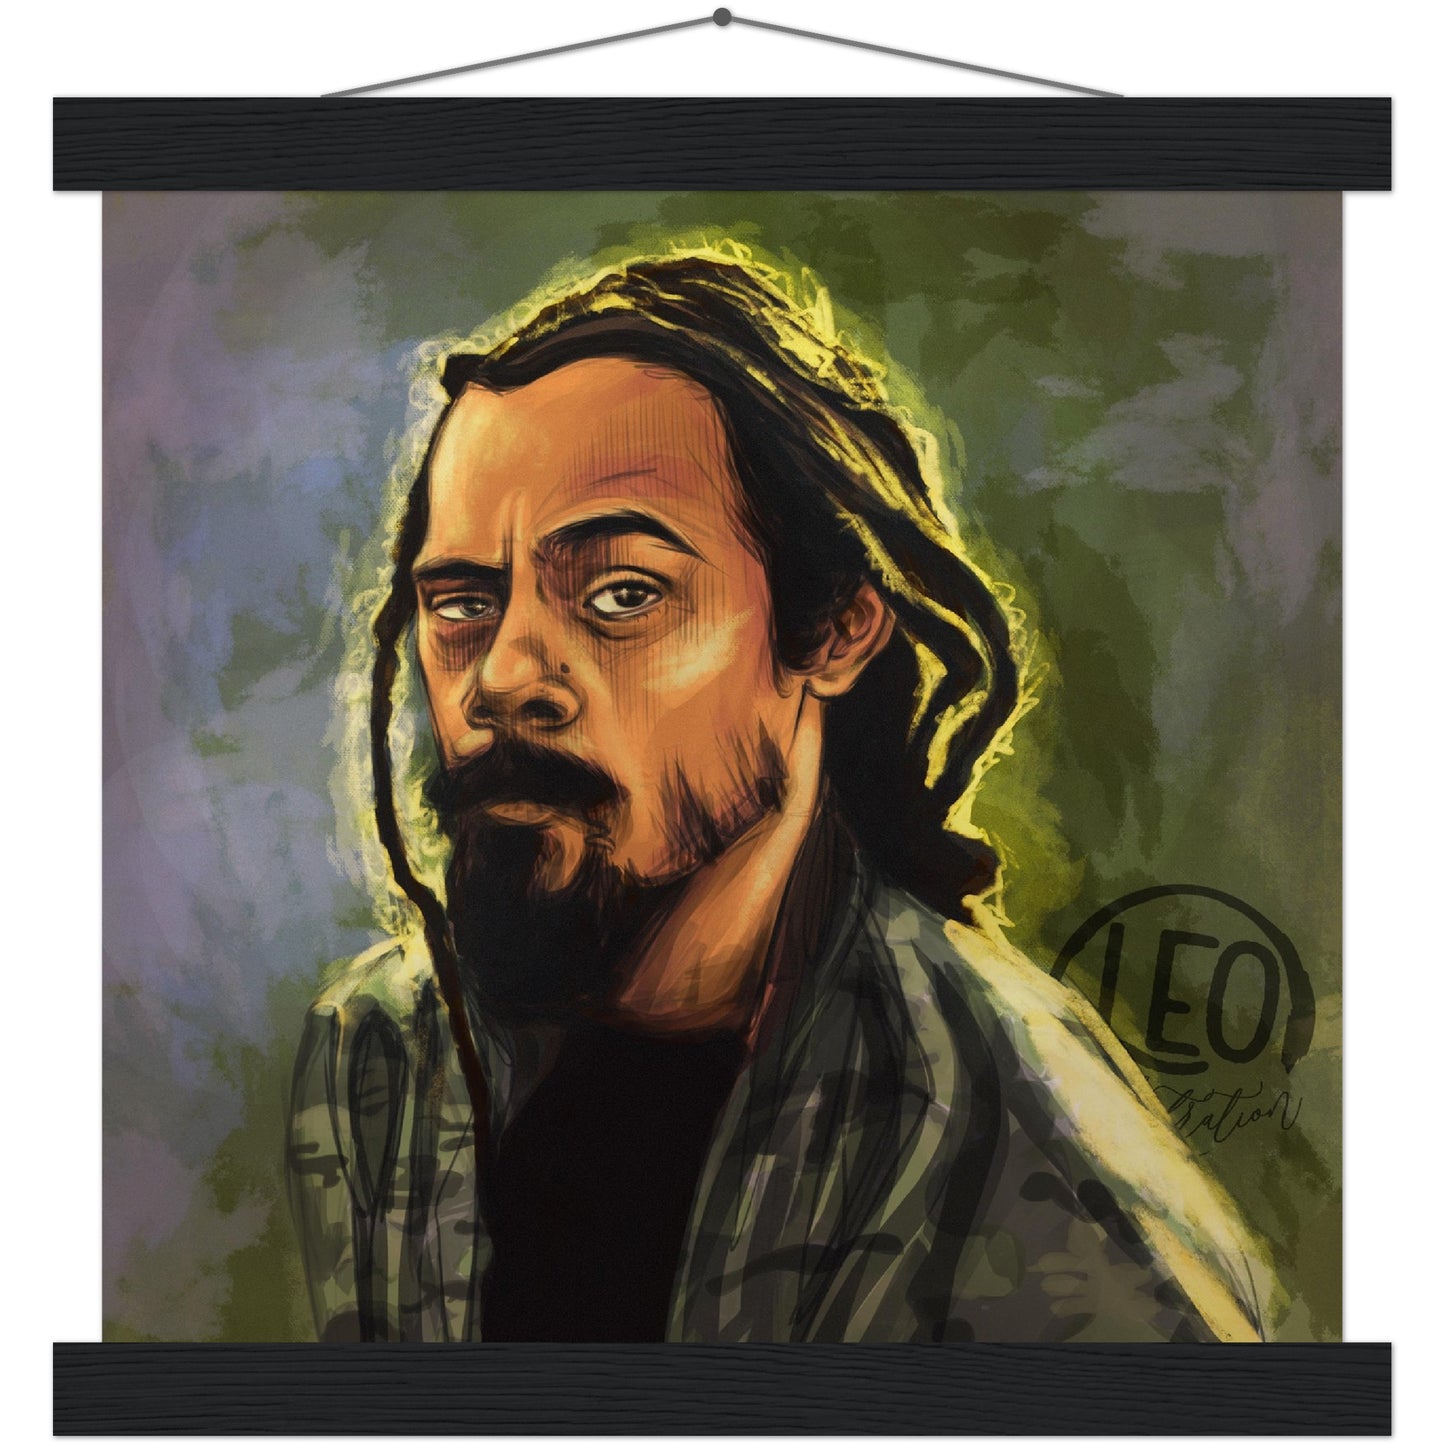 Damian Marley art portrait from Leonora, print it on a fine poster in good quality! Reggae and Dancehall Art prints!